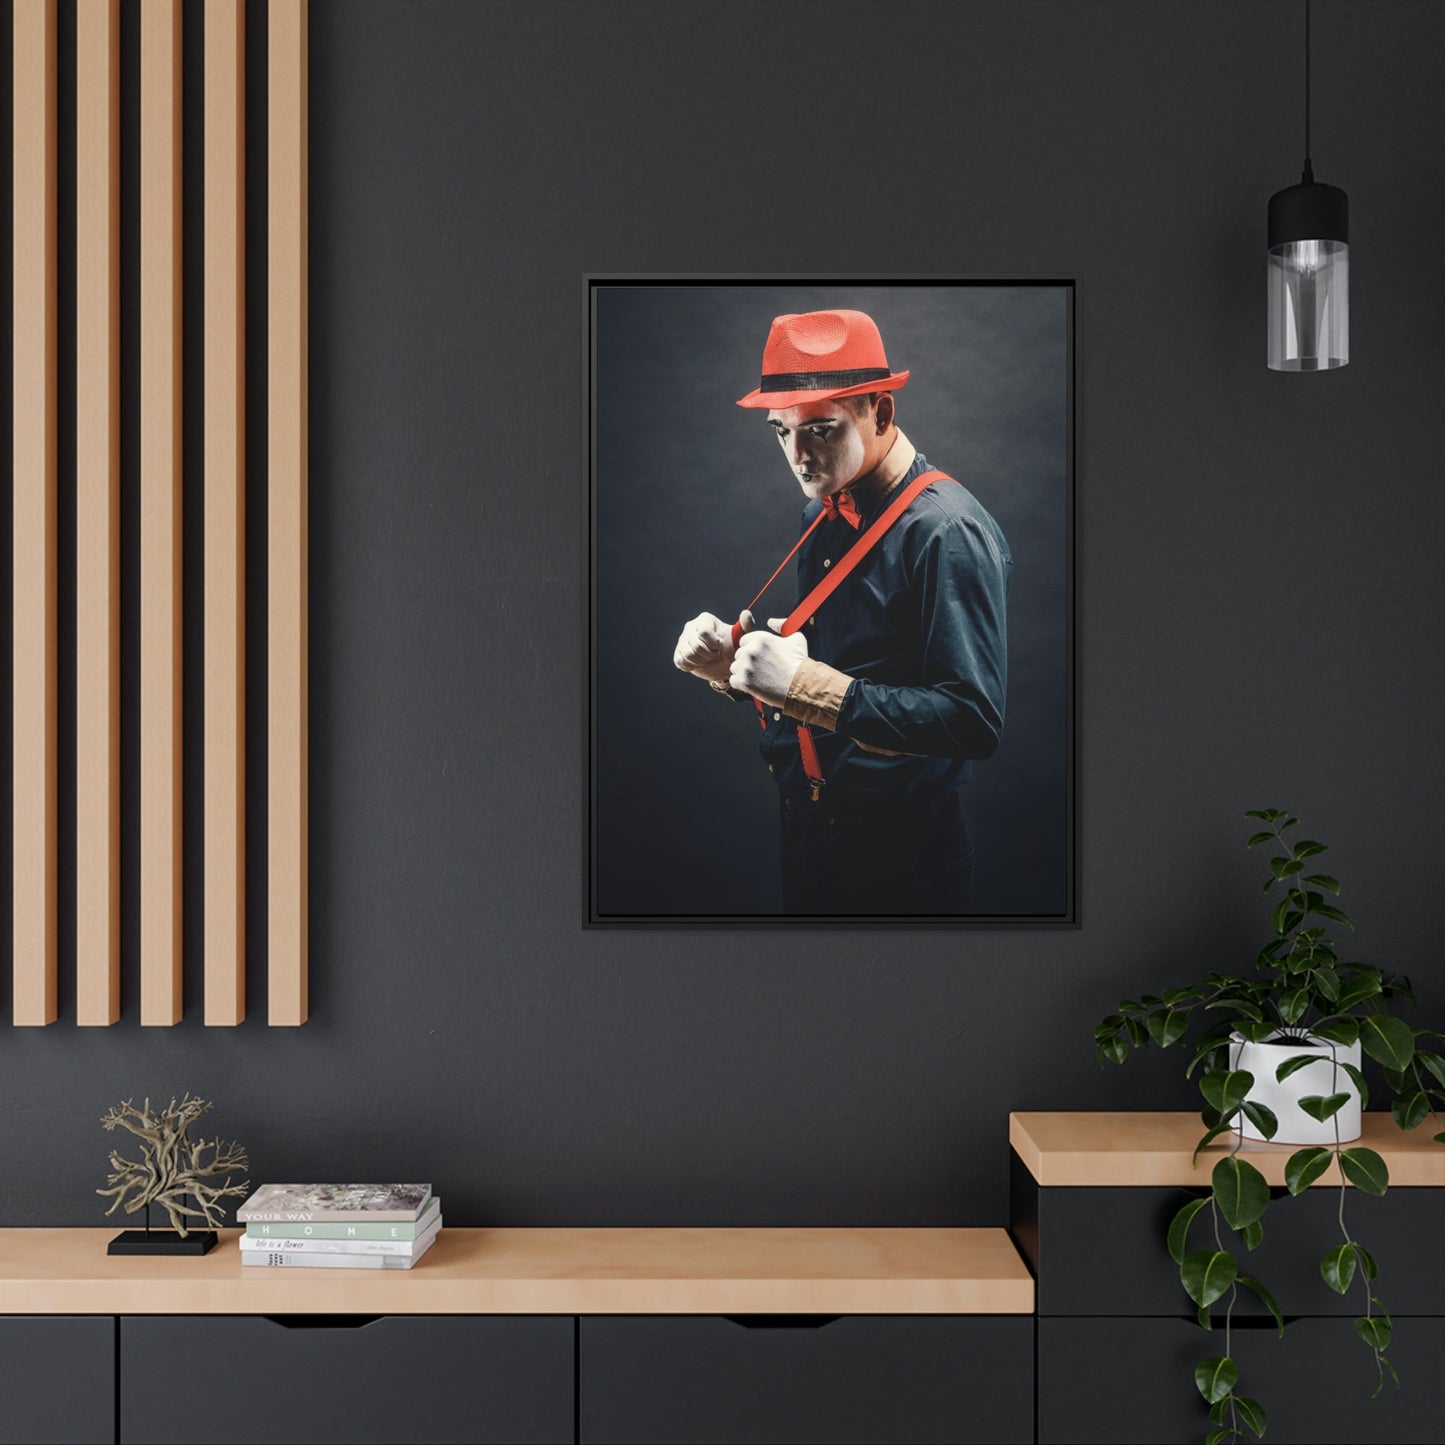 The Comedian's Art: Captivating Print on Framed Canvas for Your Home